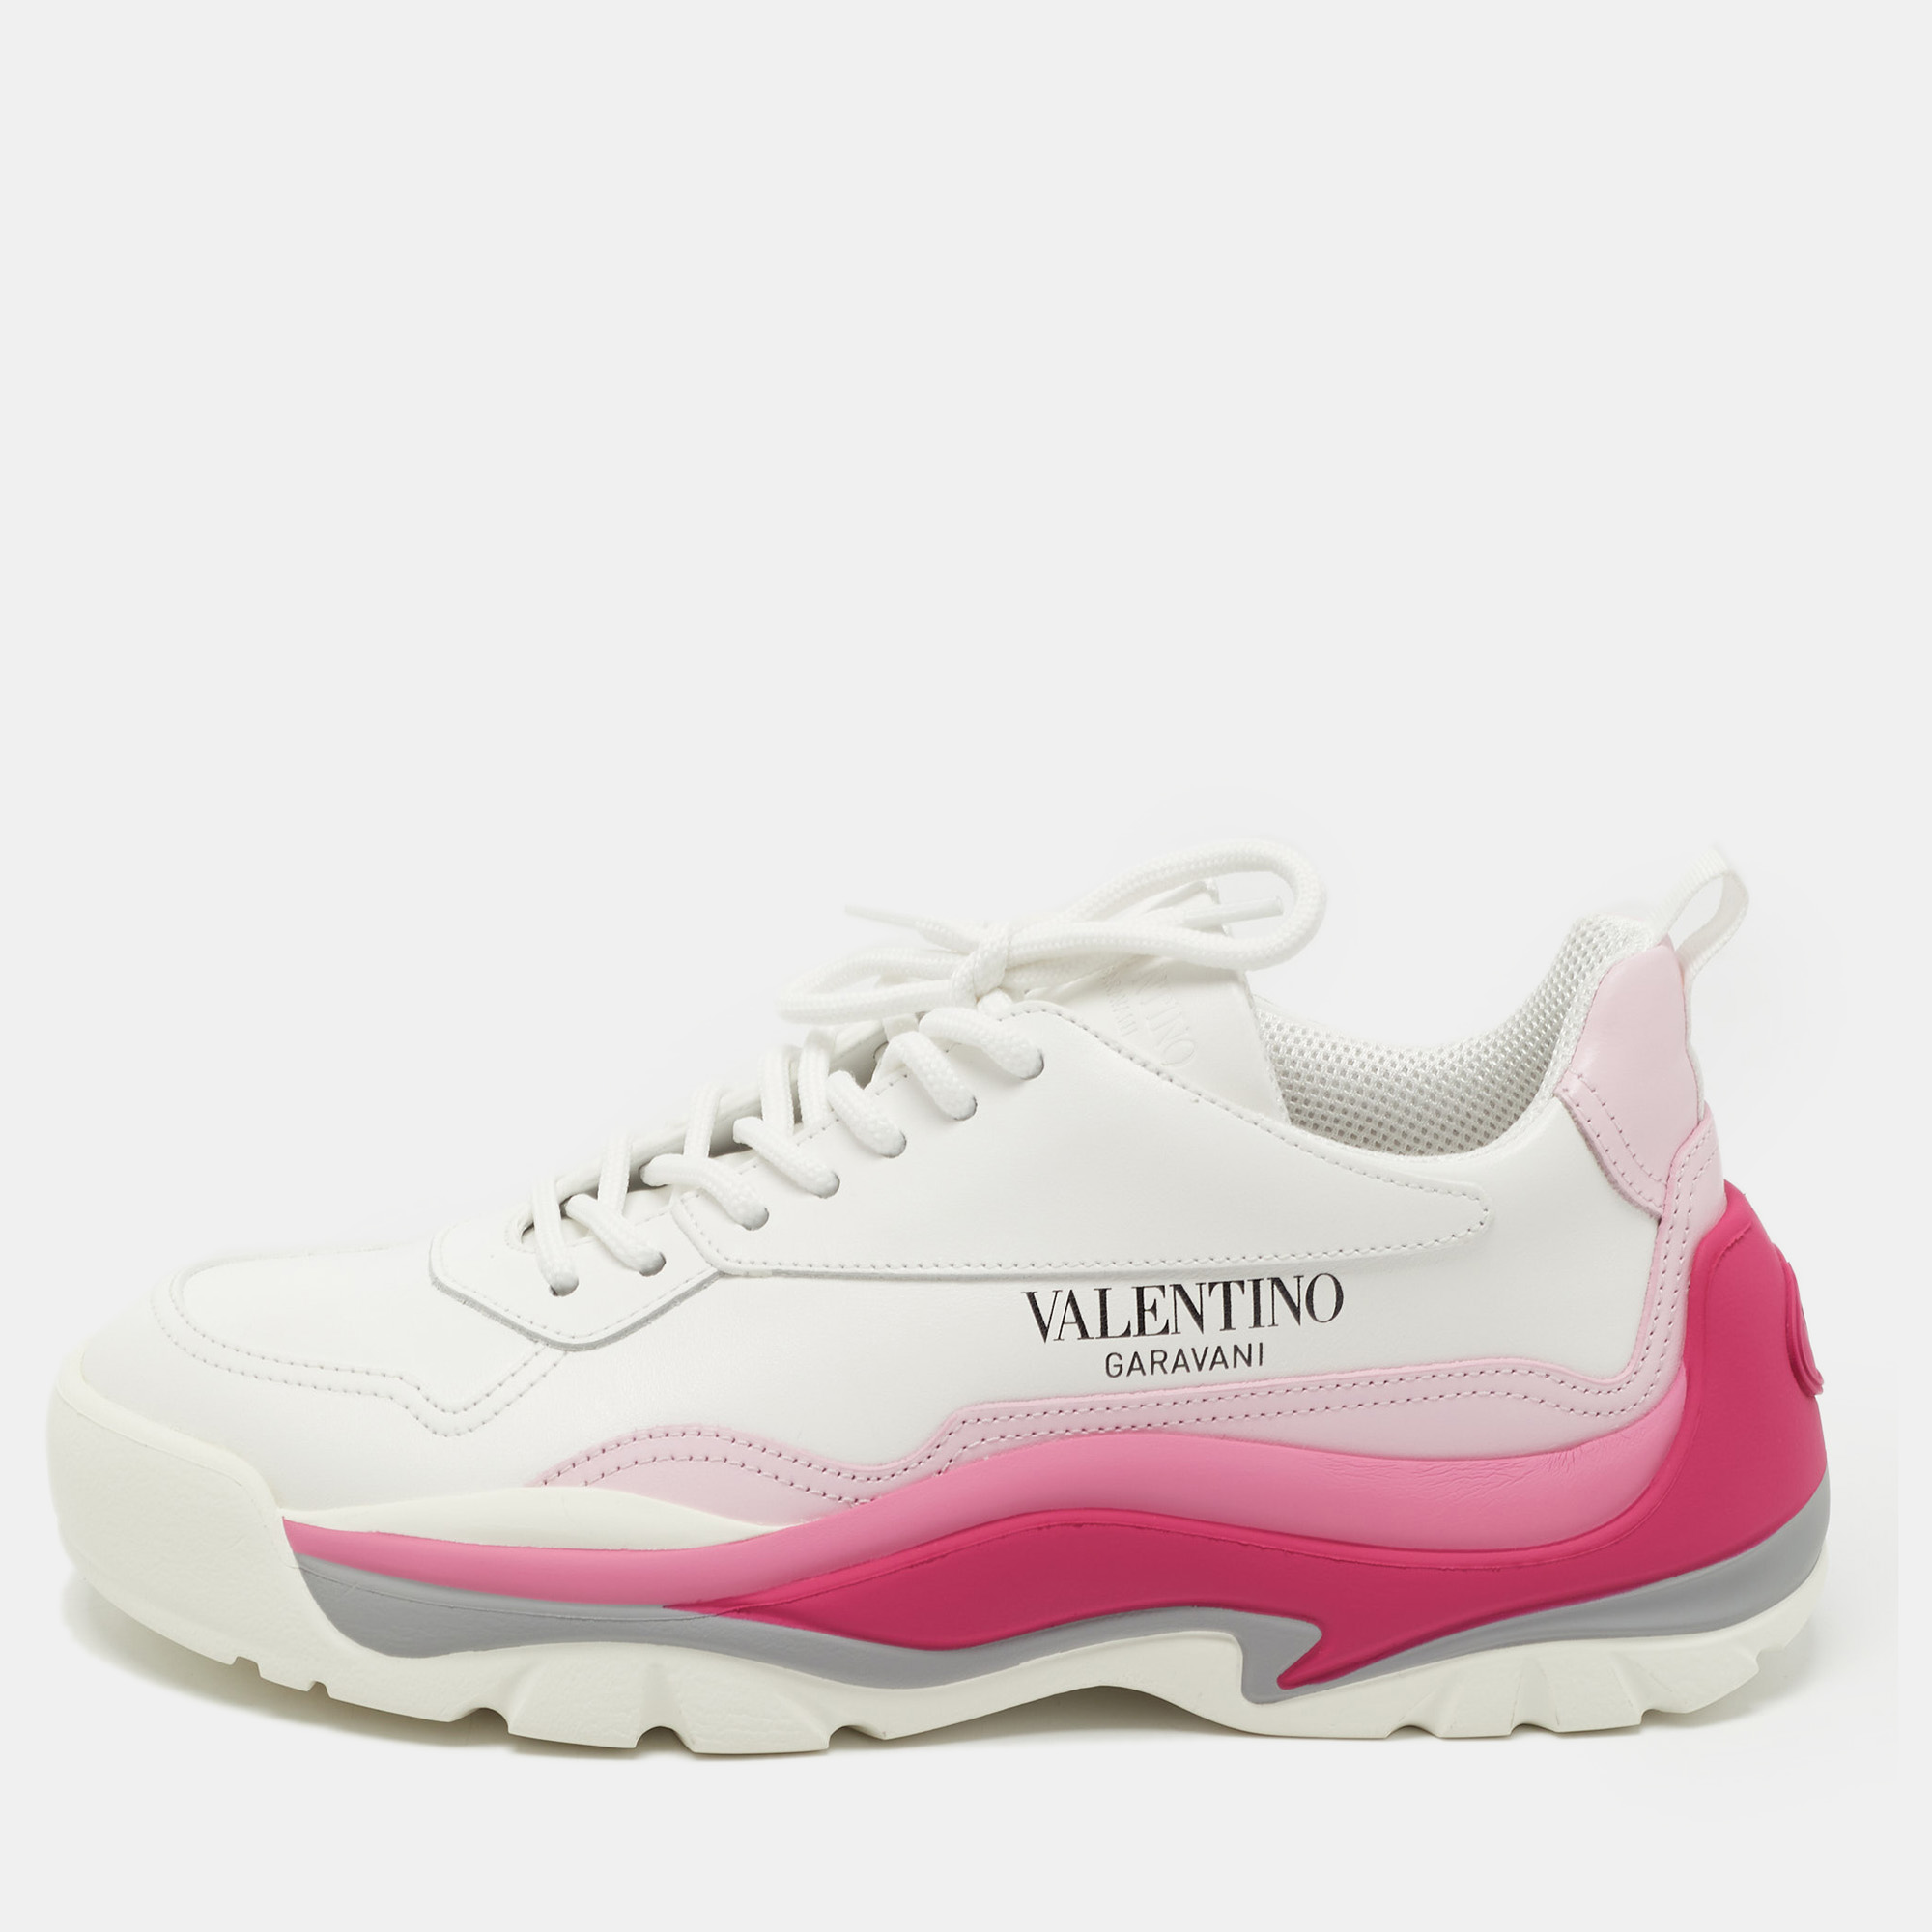 Pre-owned Valentino Garavani White/pink Leather Gumboy Sneakers Size 39